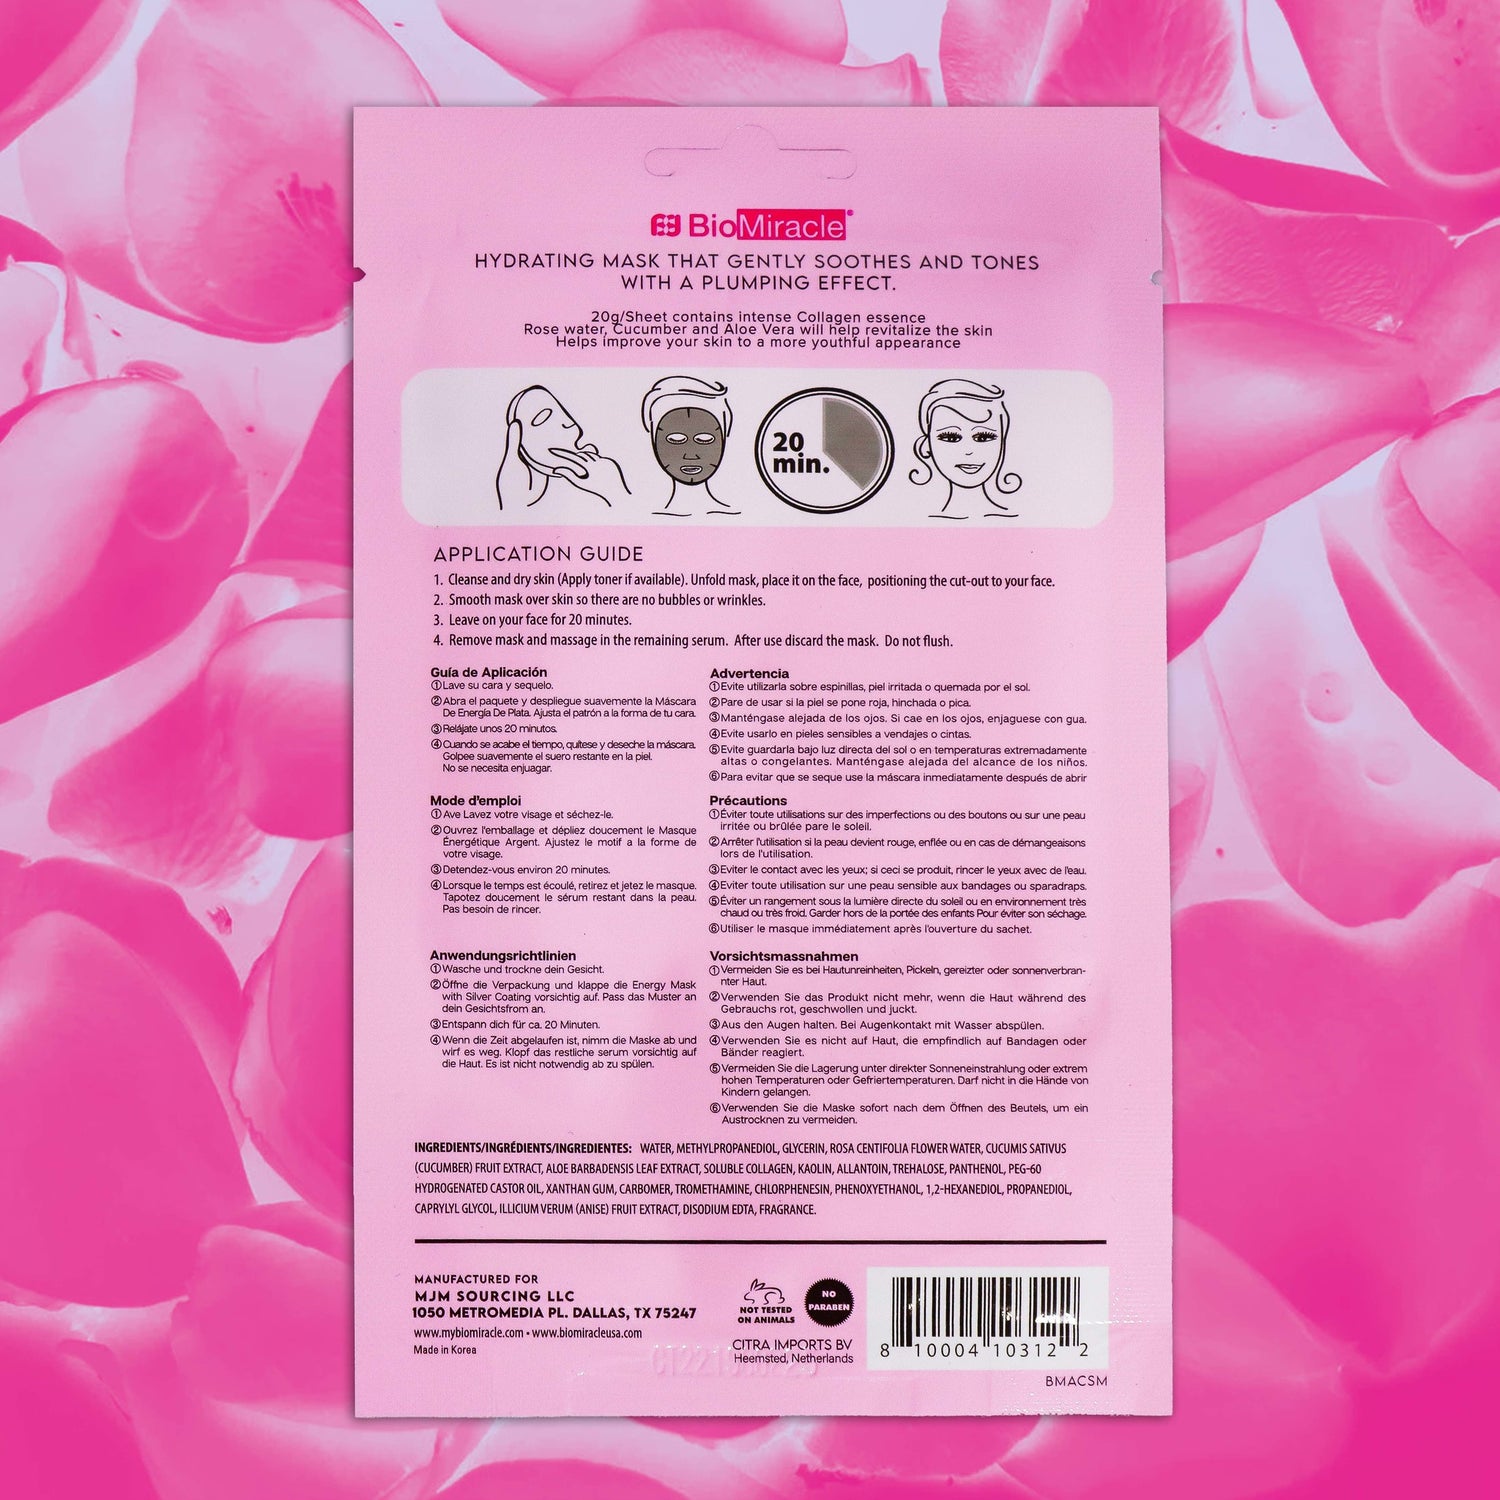 Moisturizing Collagen Sheet Mask Infused with Pink Clay, Rose Water, Cucumber and Aloe Vera-10 Pack